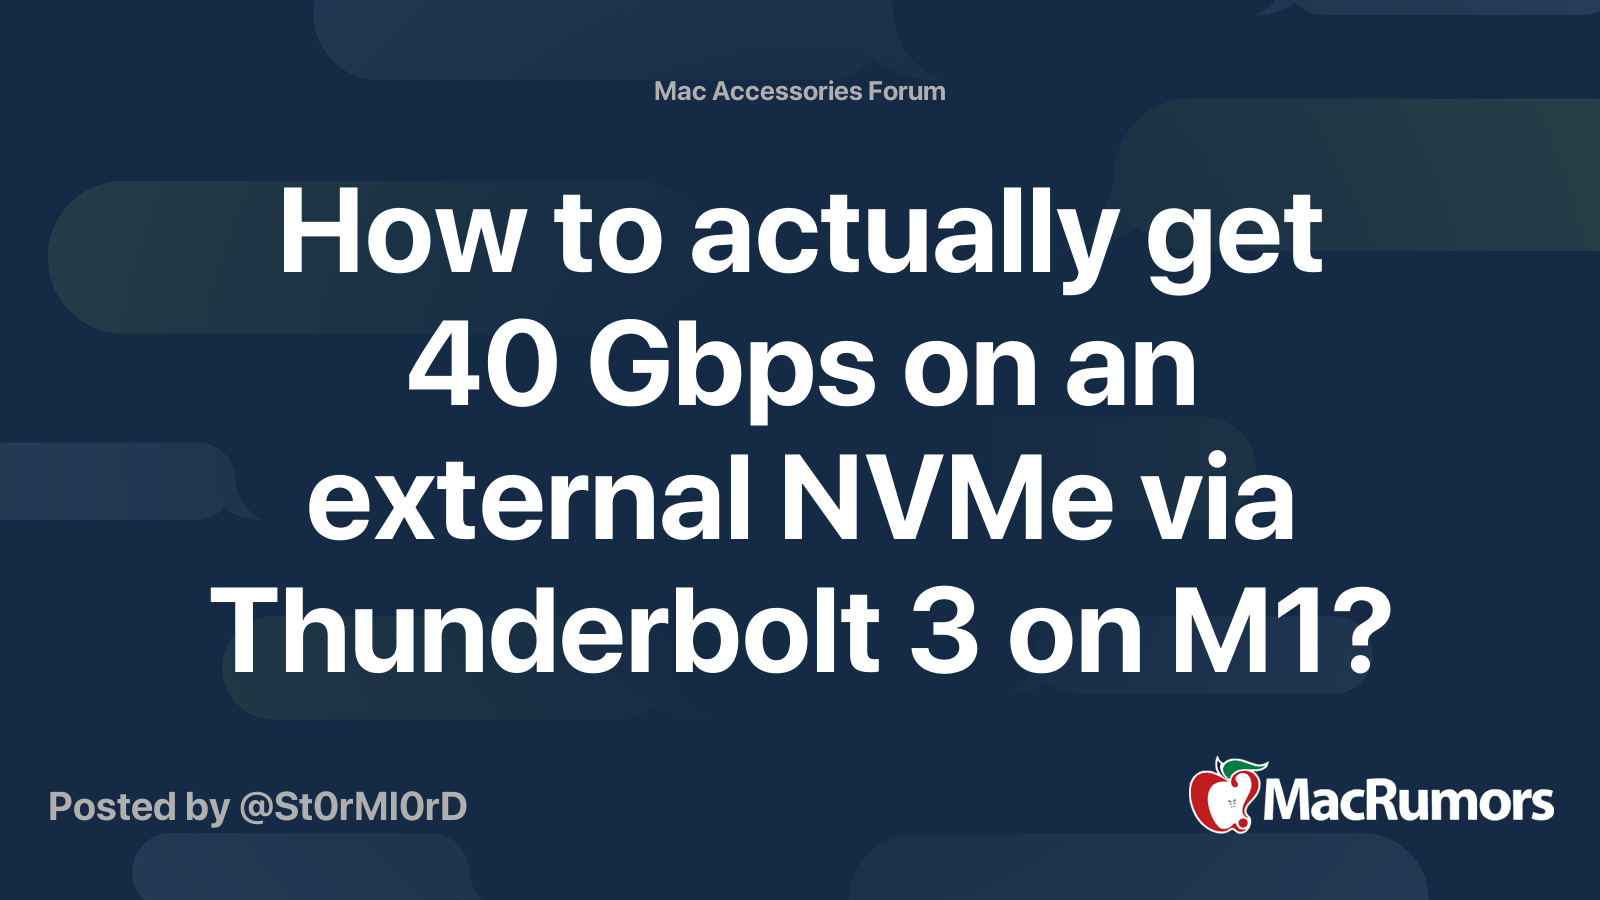 How to actually get 40 Gbps on an external NVMe via Thunderbolt 3 